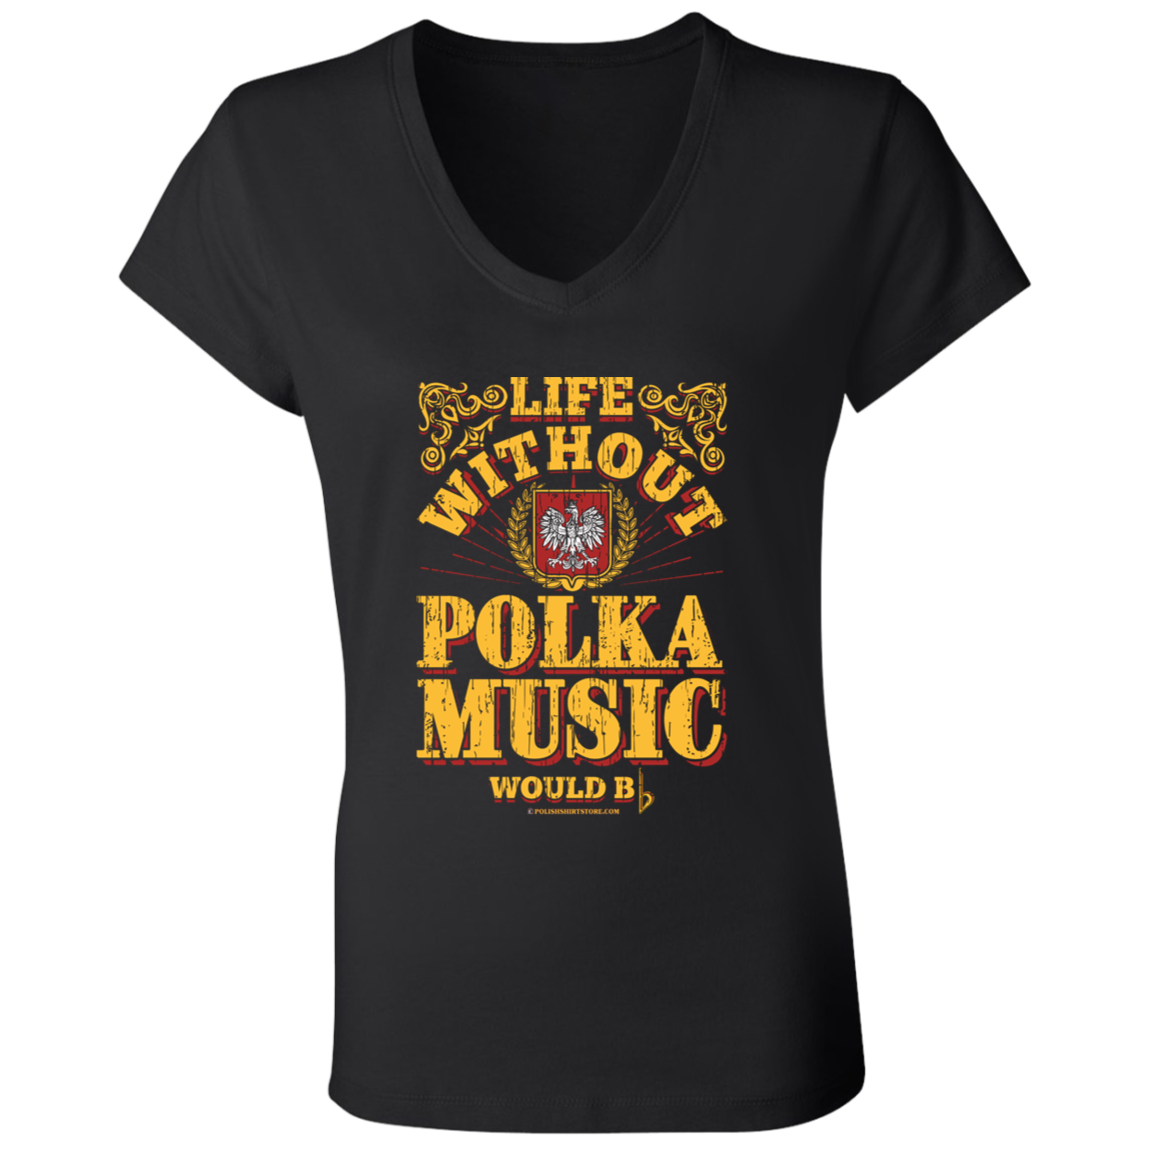 Life Without Polka Music Would Bb (Be Flat) Apparel CustomCat B6005 Ladies' Jersey V-Neck T-Shirt Black S